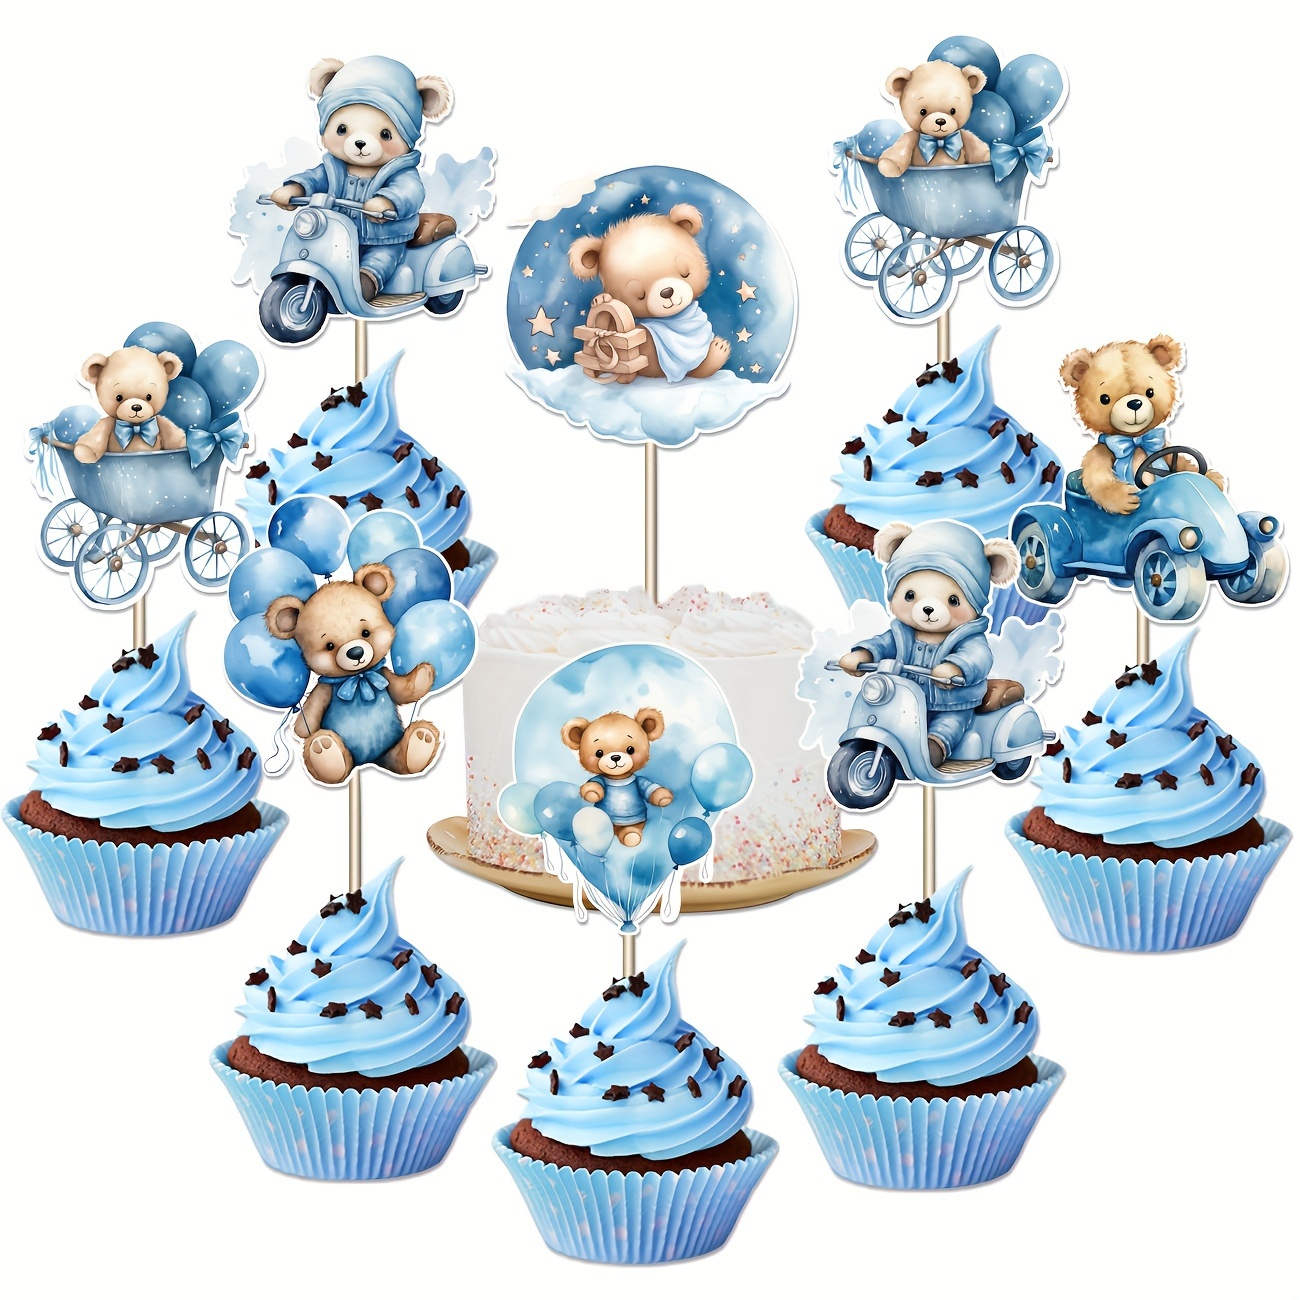 

12 Pack Blue Bear And Elephant Cupcake Toppers For Baby Shower, Gender Reveal, Birthday - Universal Celebration Paper Cake Decorations, Non-electric, Featherless, Themed Party Supplies